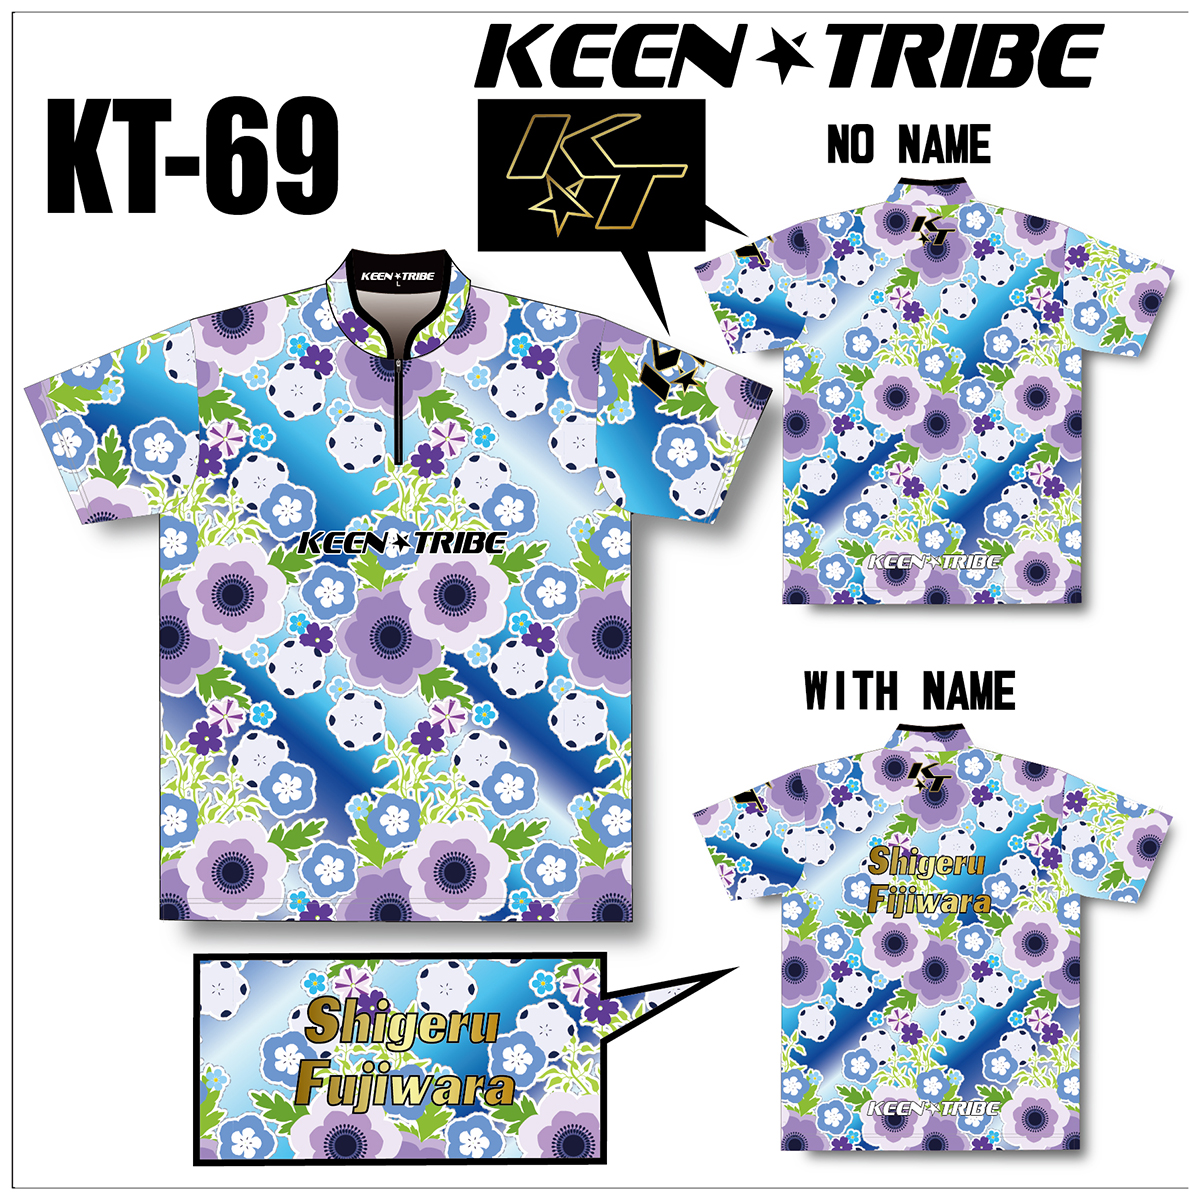 KEEN ★ TRIBE　KT-69(受注生産)